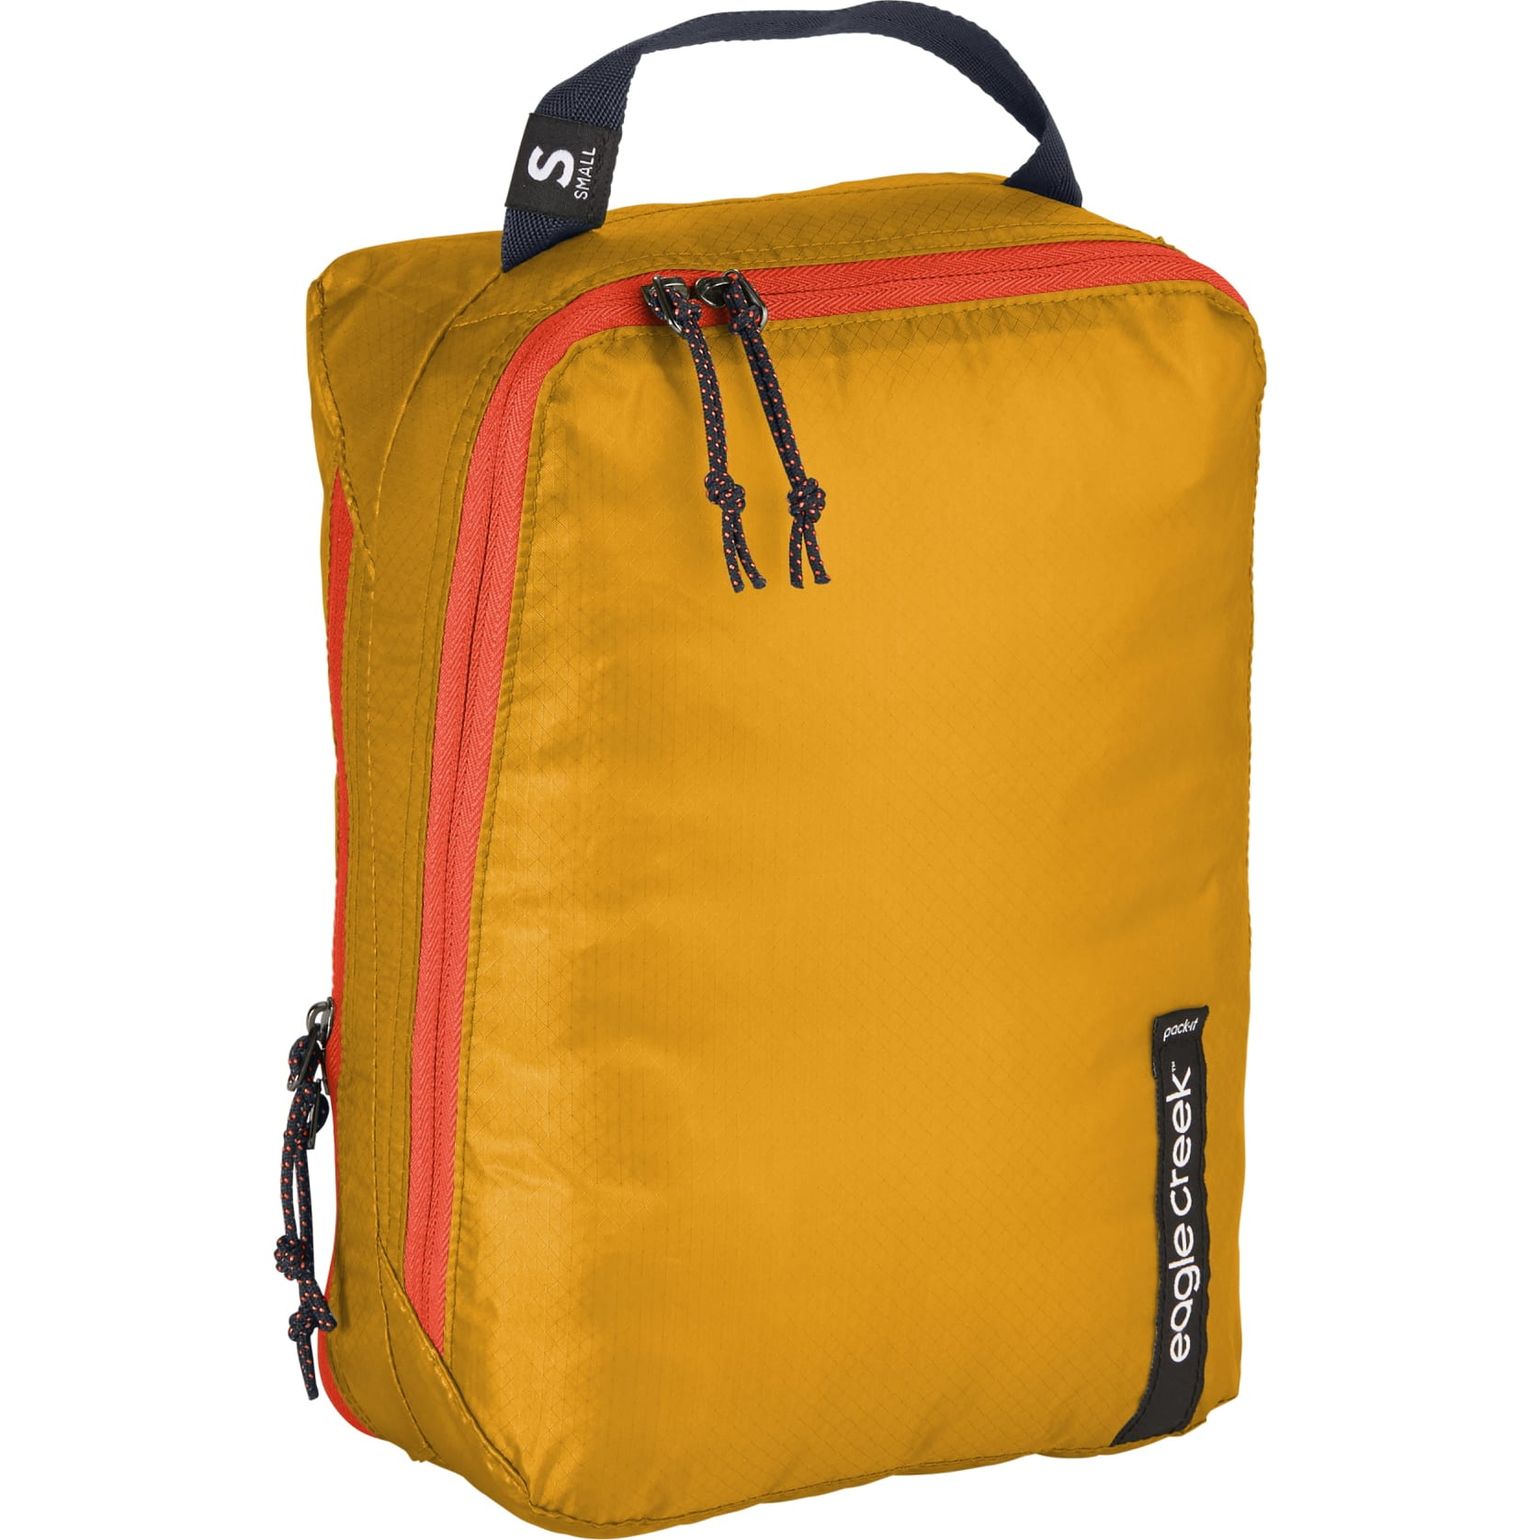 Pack-It Isolate Clean/Dirty Cube S Sahara Yellow